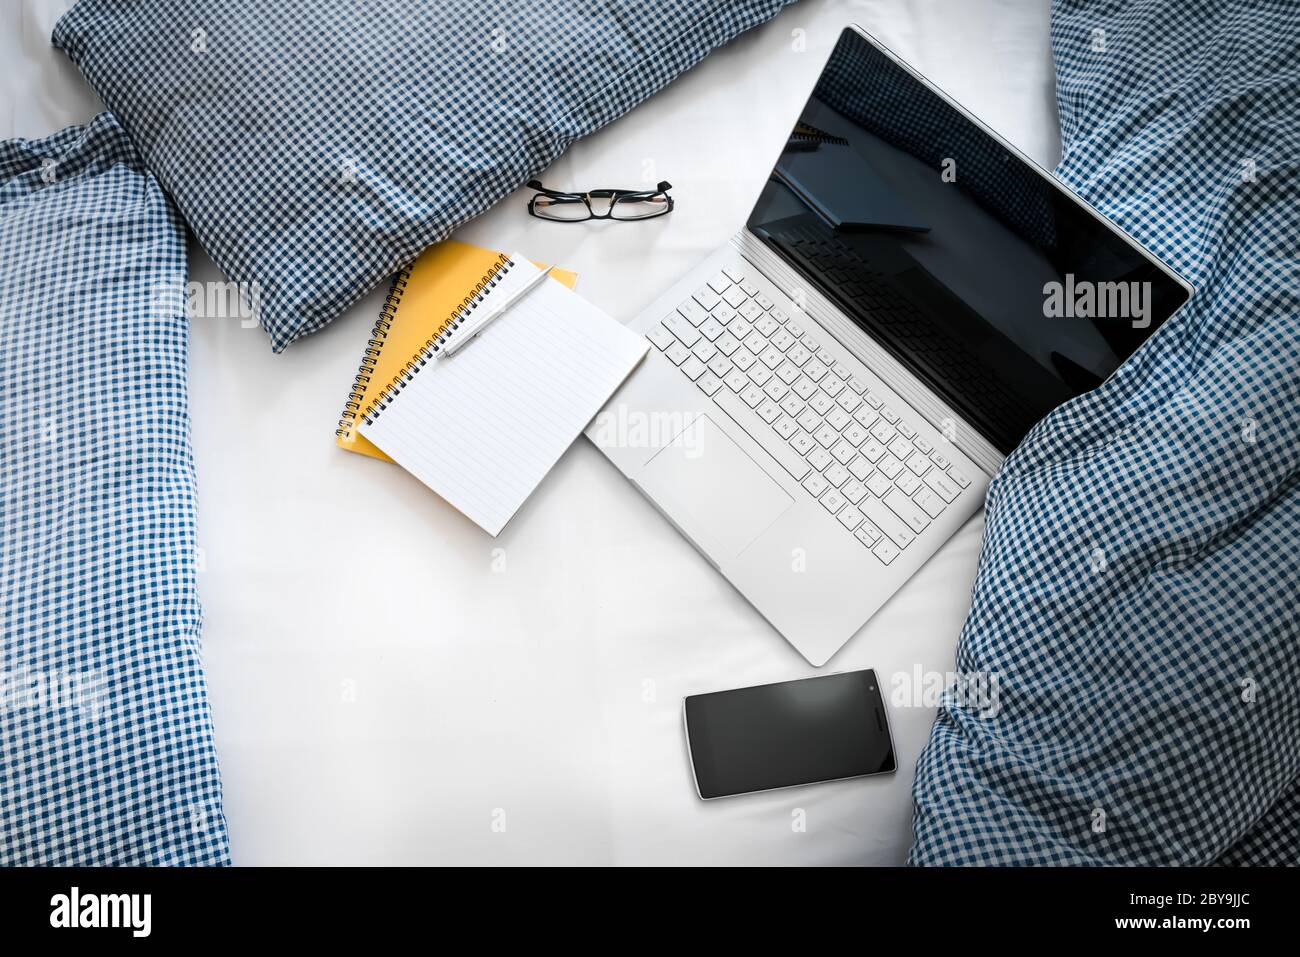 WFH - Work from Home Laptop, Notepad and Mobile Phone on Bed 1 Stock Photo